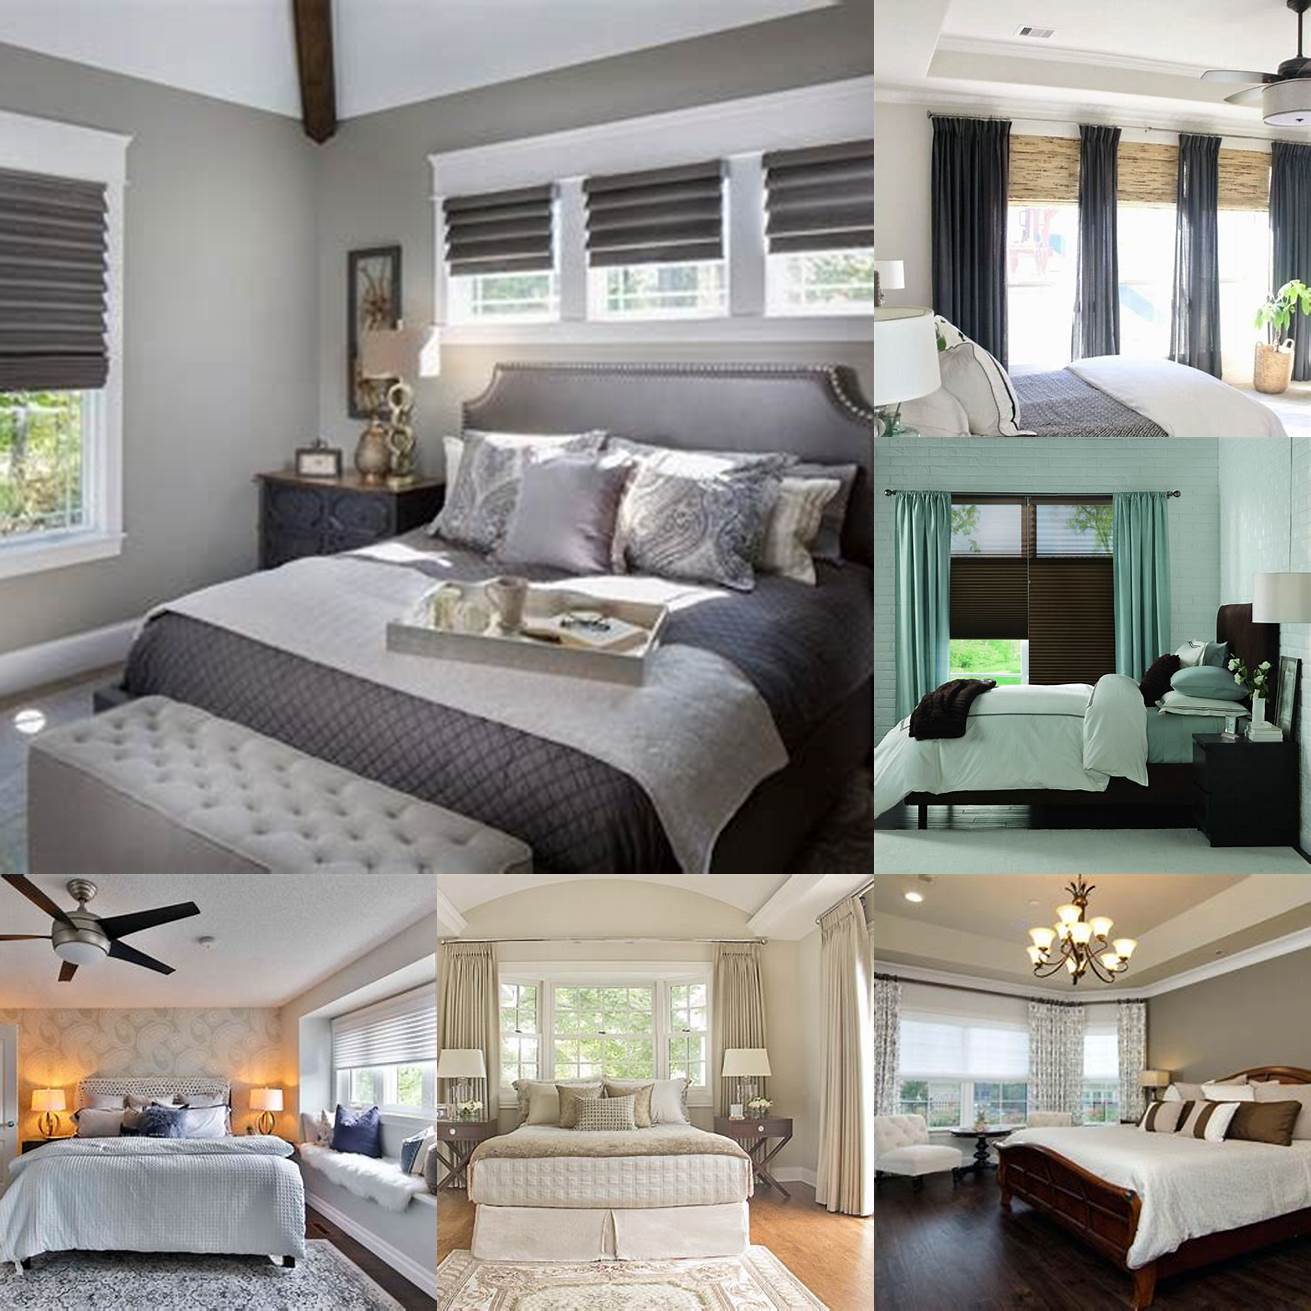 Window treatments to complete your bedrooms look